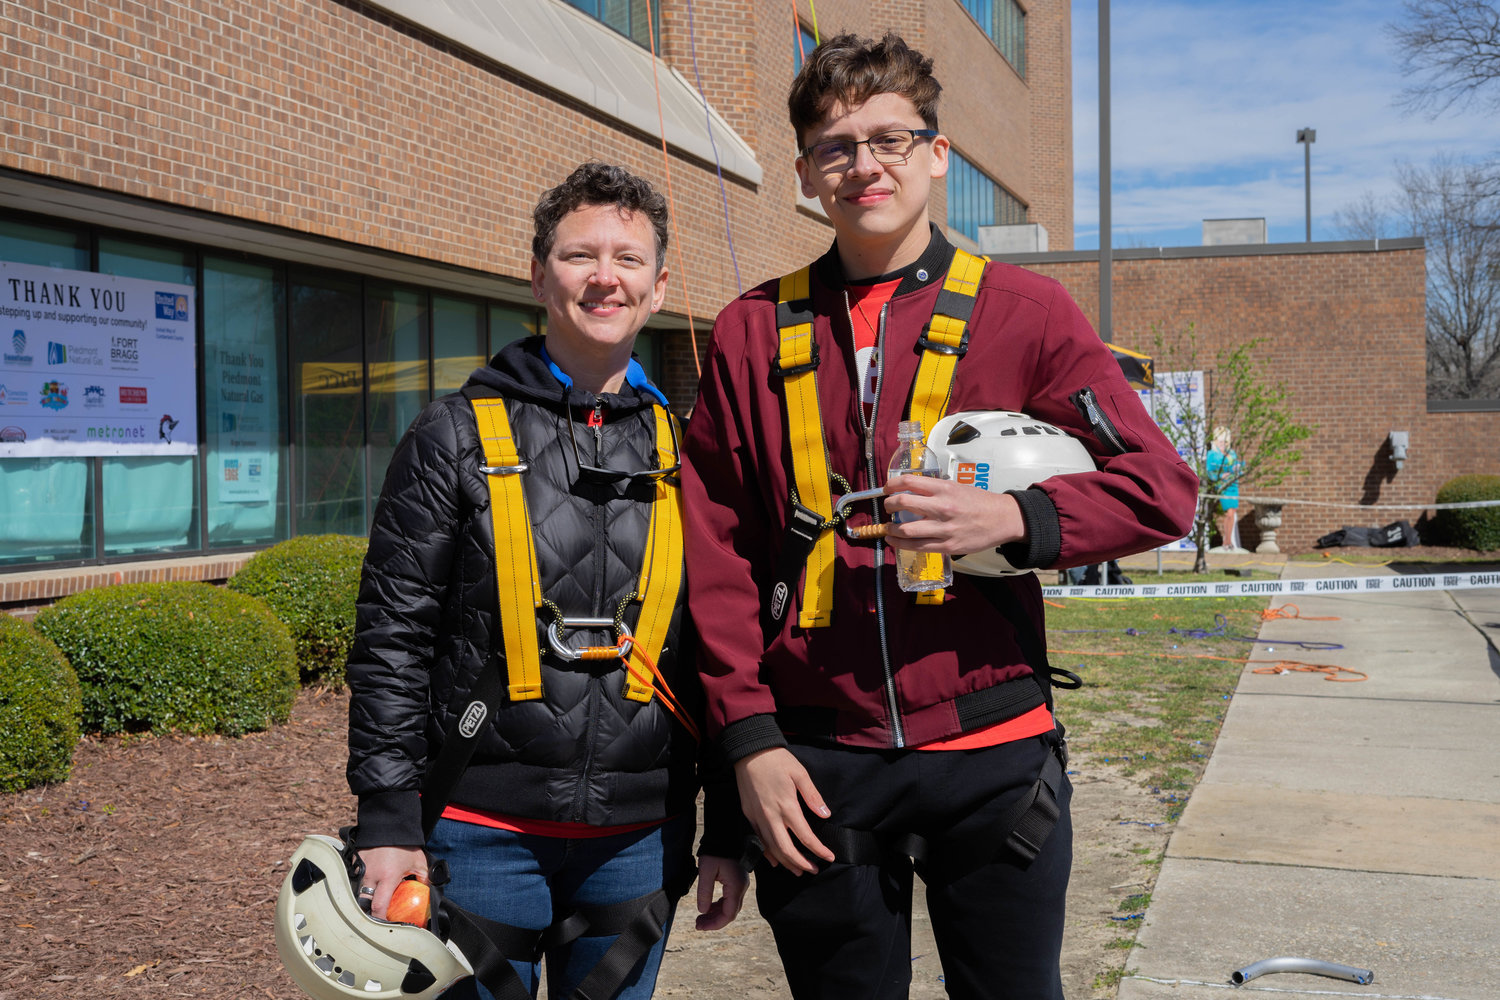 Jaclyn Shambaugh of Fayetteville Technical Community College and Robert Chappelle turned out for Over the Edge, a United Way fundraiser.